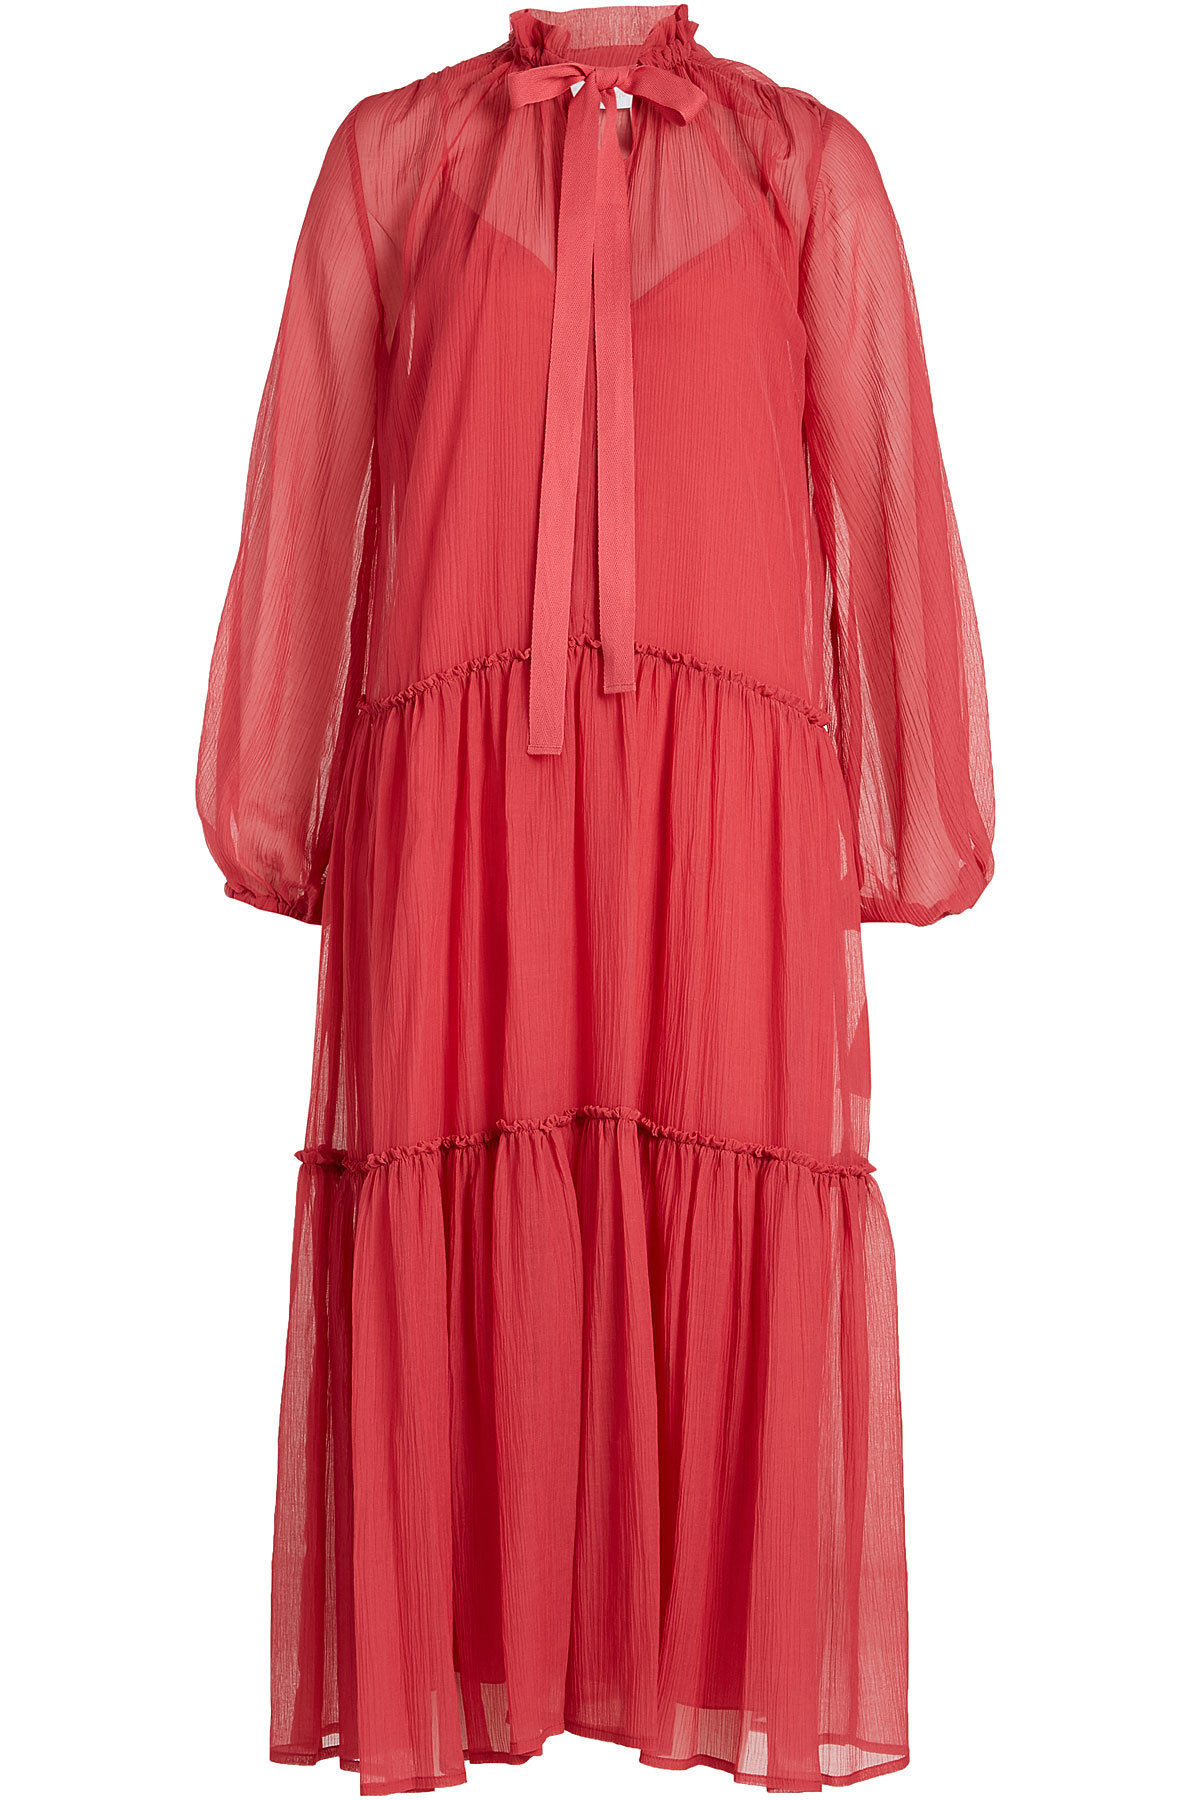 See by Chloe - Dress in Cotton and Silk